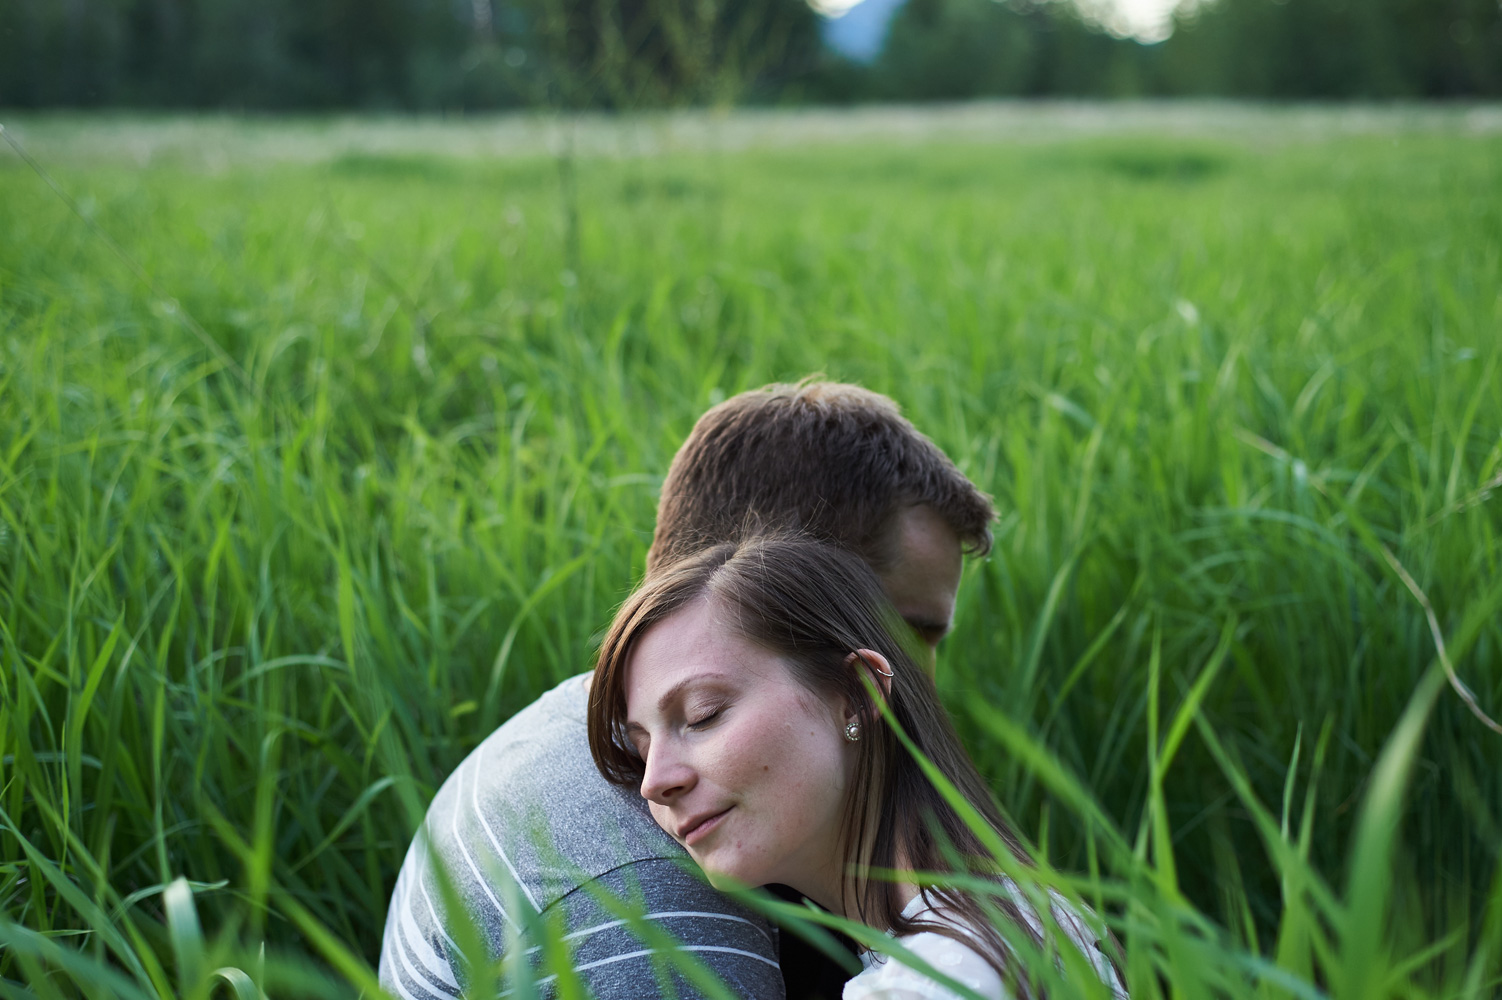 engaged-couple-in-a-grassy-field-hugging.jpg